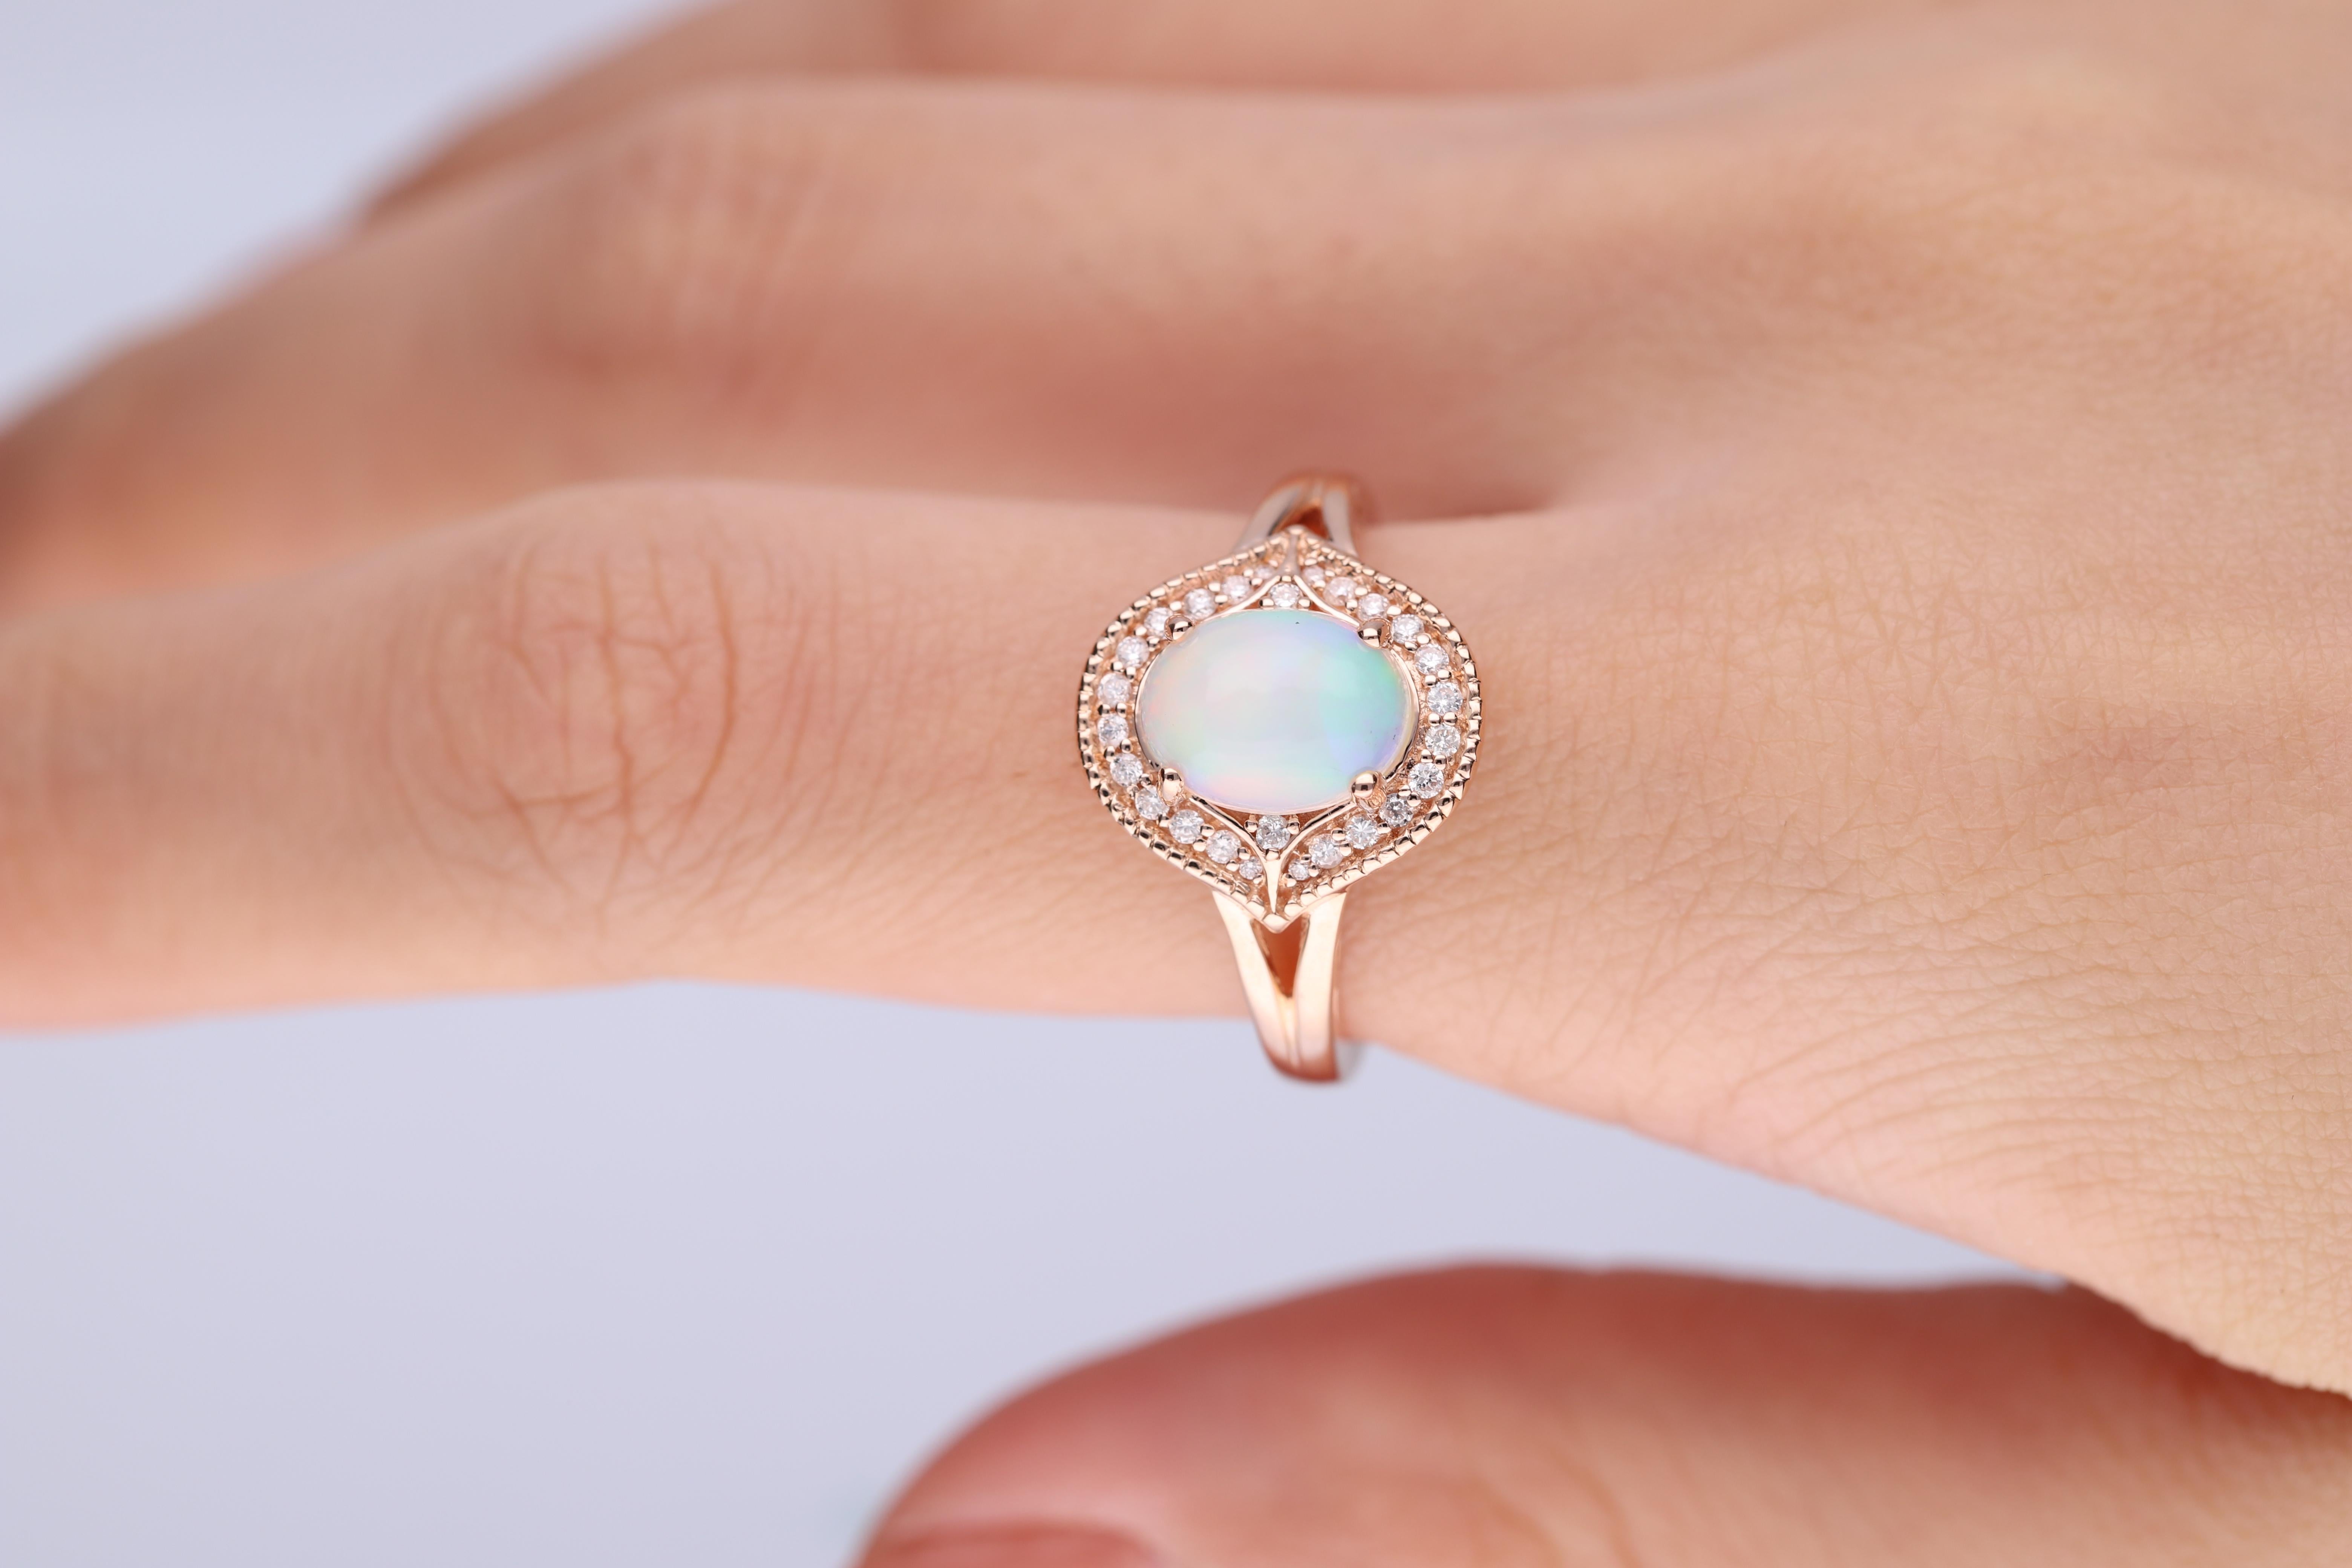 This beautiful opal ring is crafted in 14-karat Rose gold and features a 1.14 carat Ethiopian Opal & 26 Round Diamonds in GH- I1 quality with 0.16 ct. in a prong-setting. This ring comes in sizes 6 to 9, and it is a perfect gift either for yourself